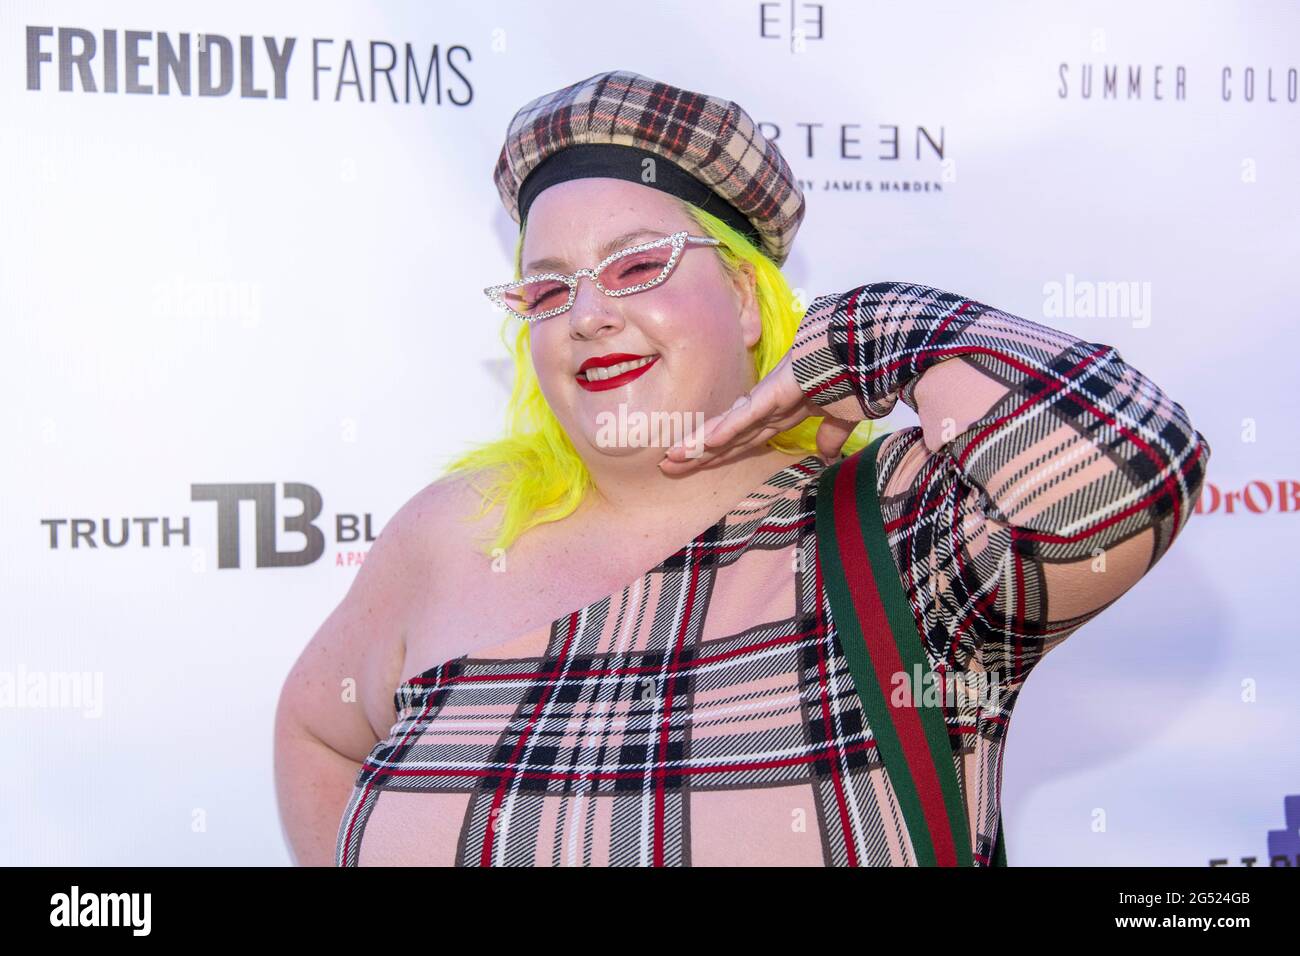 West Hollywood, USA. 24th June, 2021. MargiePlus attends 1st Pre-BET Awards Celebrity Gifting suite powered by Rocco's WeHo!, Los Angeles, CA on June 24, 2021 Credit: Eugene Powers/Alamy Live News Stock Photo